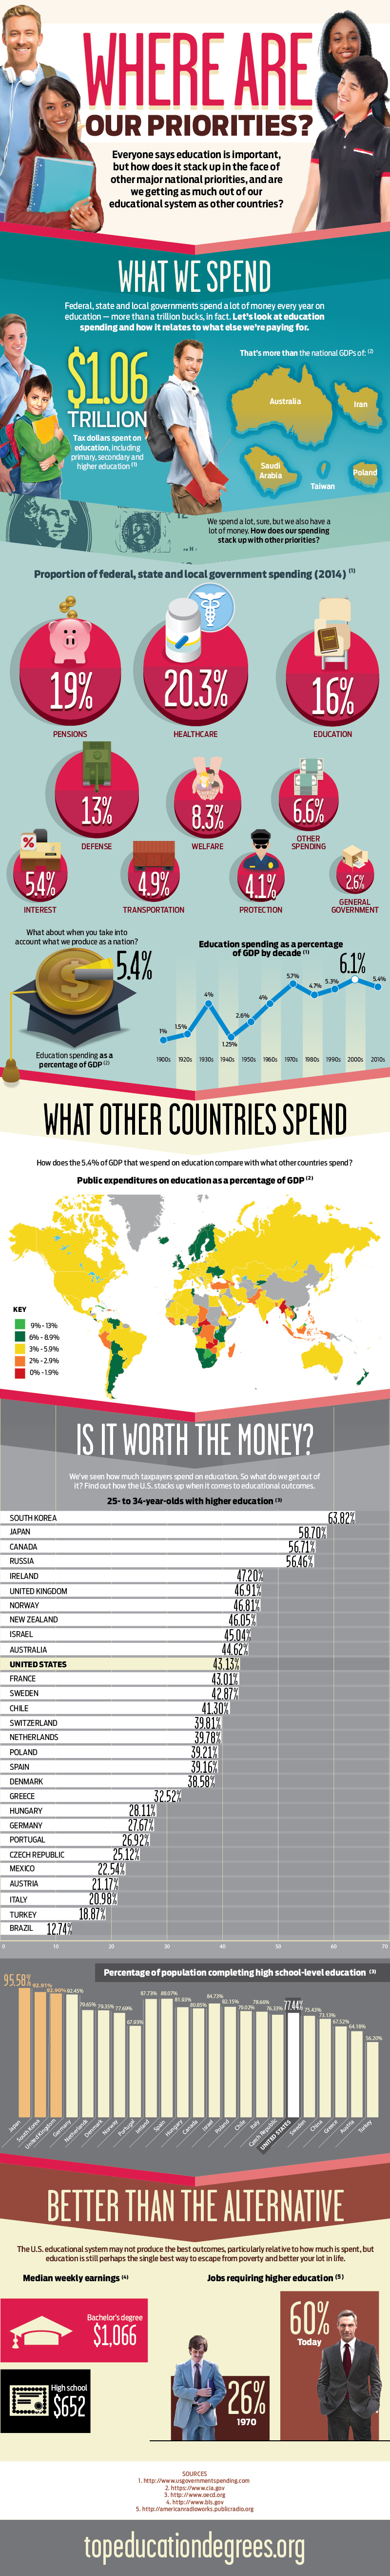 Education Spending: Where Are Our Priorities?